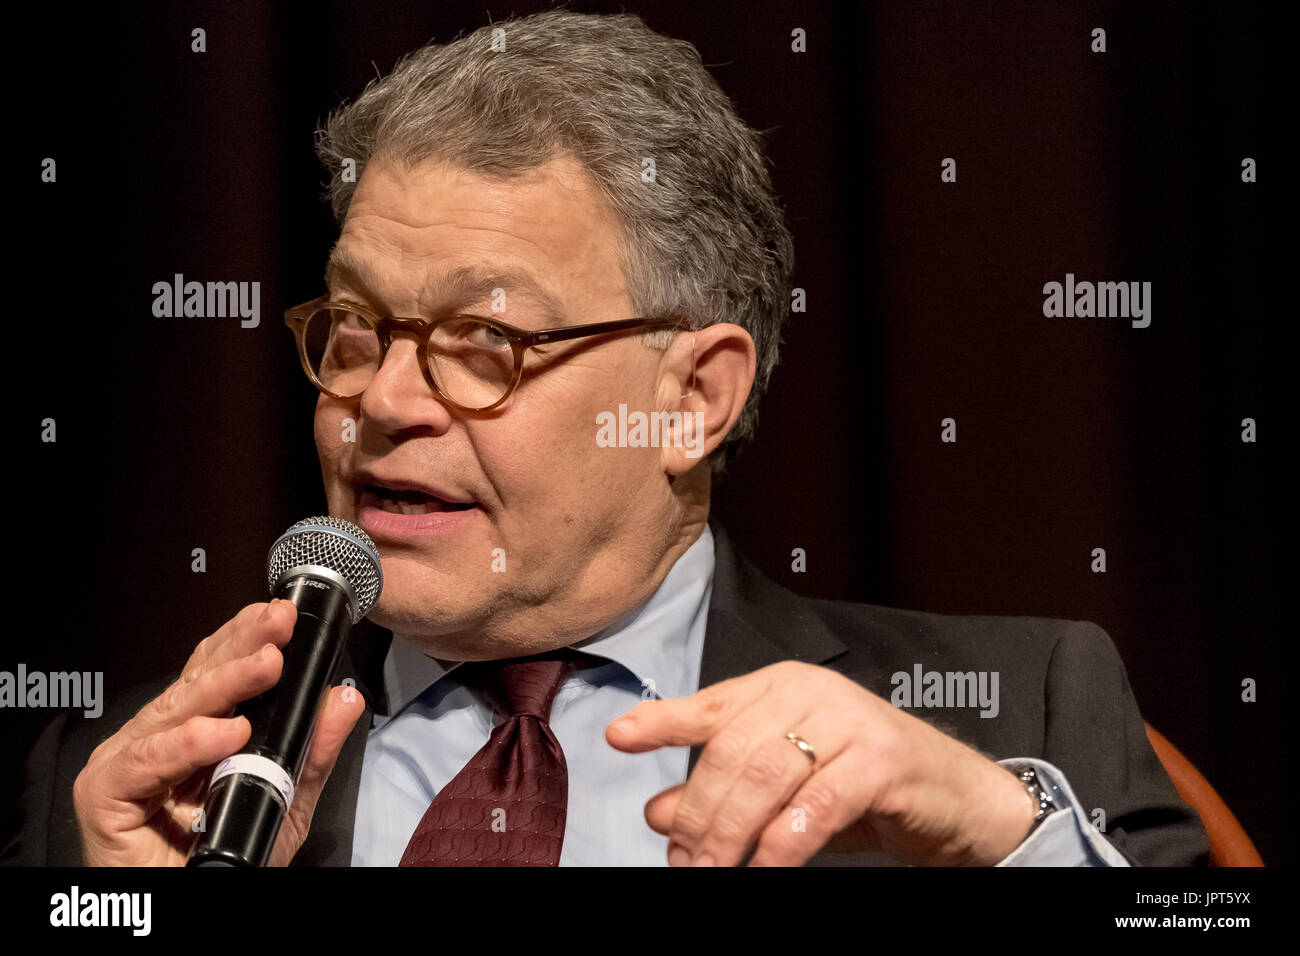 Senator Al Franken is seen at Cooper Union. U.S. Senator for Minnesota Al Franken participated in a conversation with comedian and late-night host Seth Meyers in the Great Hall at Cooper Union. At the event, organized by The Strand bookstore, Senator Franken discussed his career in politics and his new book "Giant of the Senate." Credit: PACIFIC PRESS/Alamy Live News Stock Photo